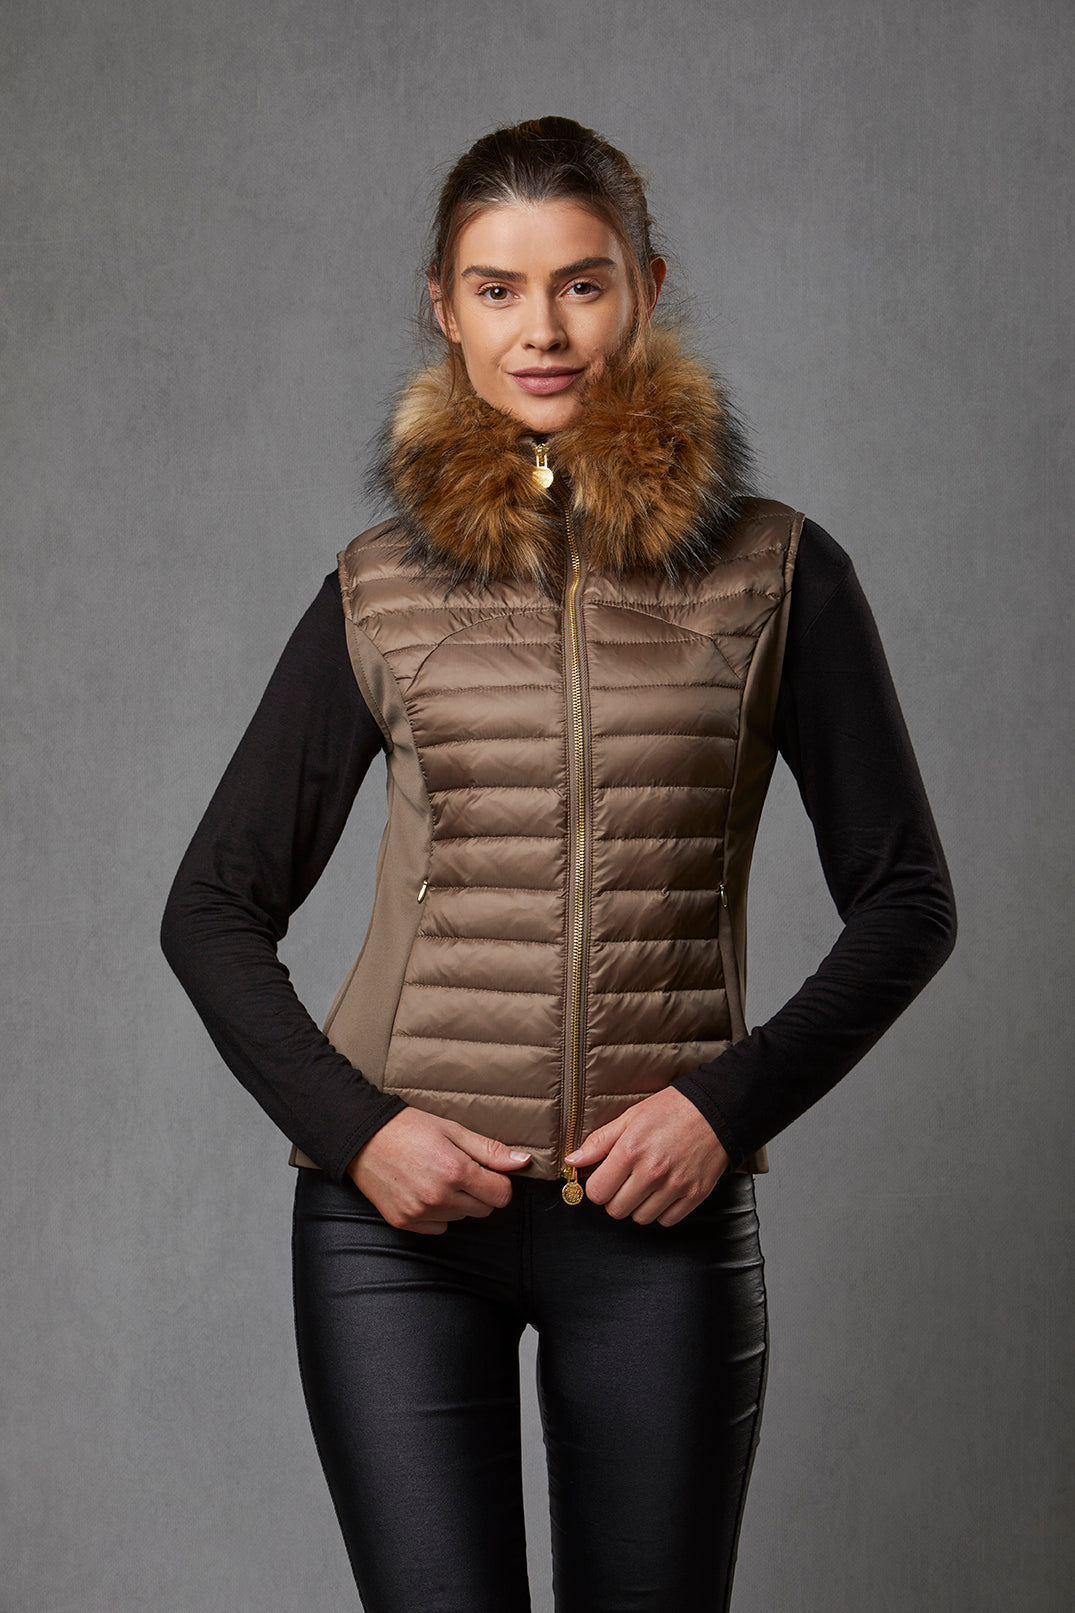 A model is wearing a women's puffer gilet in a khaki, bronze colour. The gilet has a detachable faux fur collar and stretch sides. The puffer gilet has a branded gold zip.